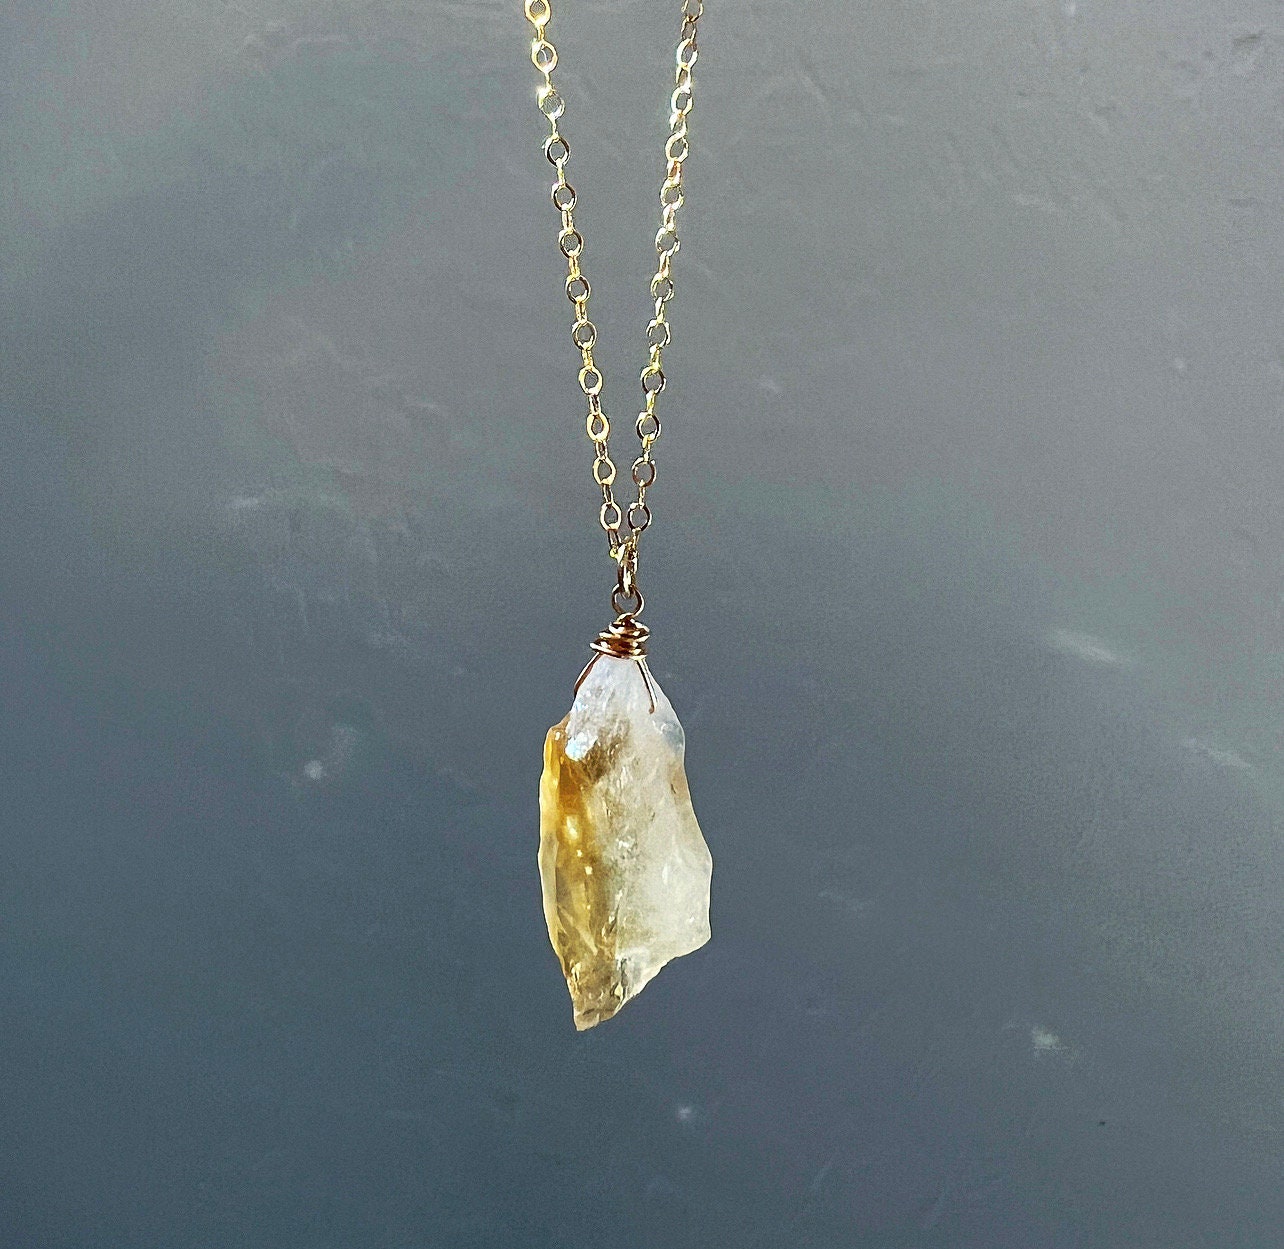 Citrine Nugget Necklace, Gold Filled Necklace, Layering Necklaces, Natural Crystal Stone Necklace, Citrine Jewelry, Crystal Stone Necklace